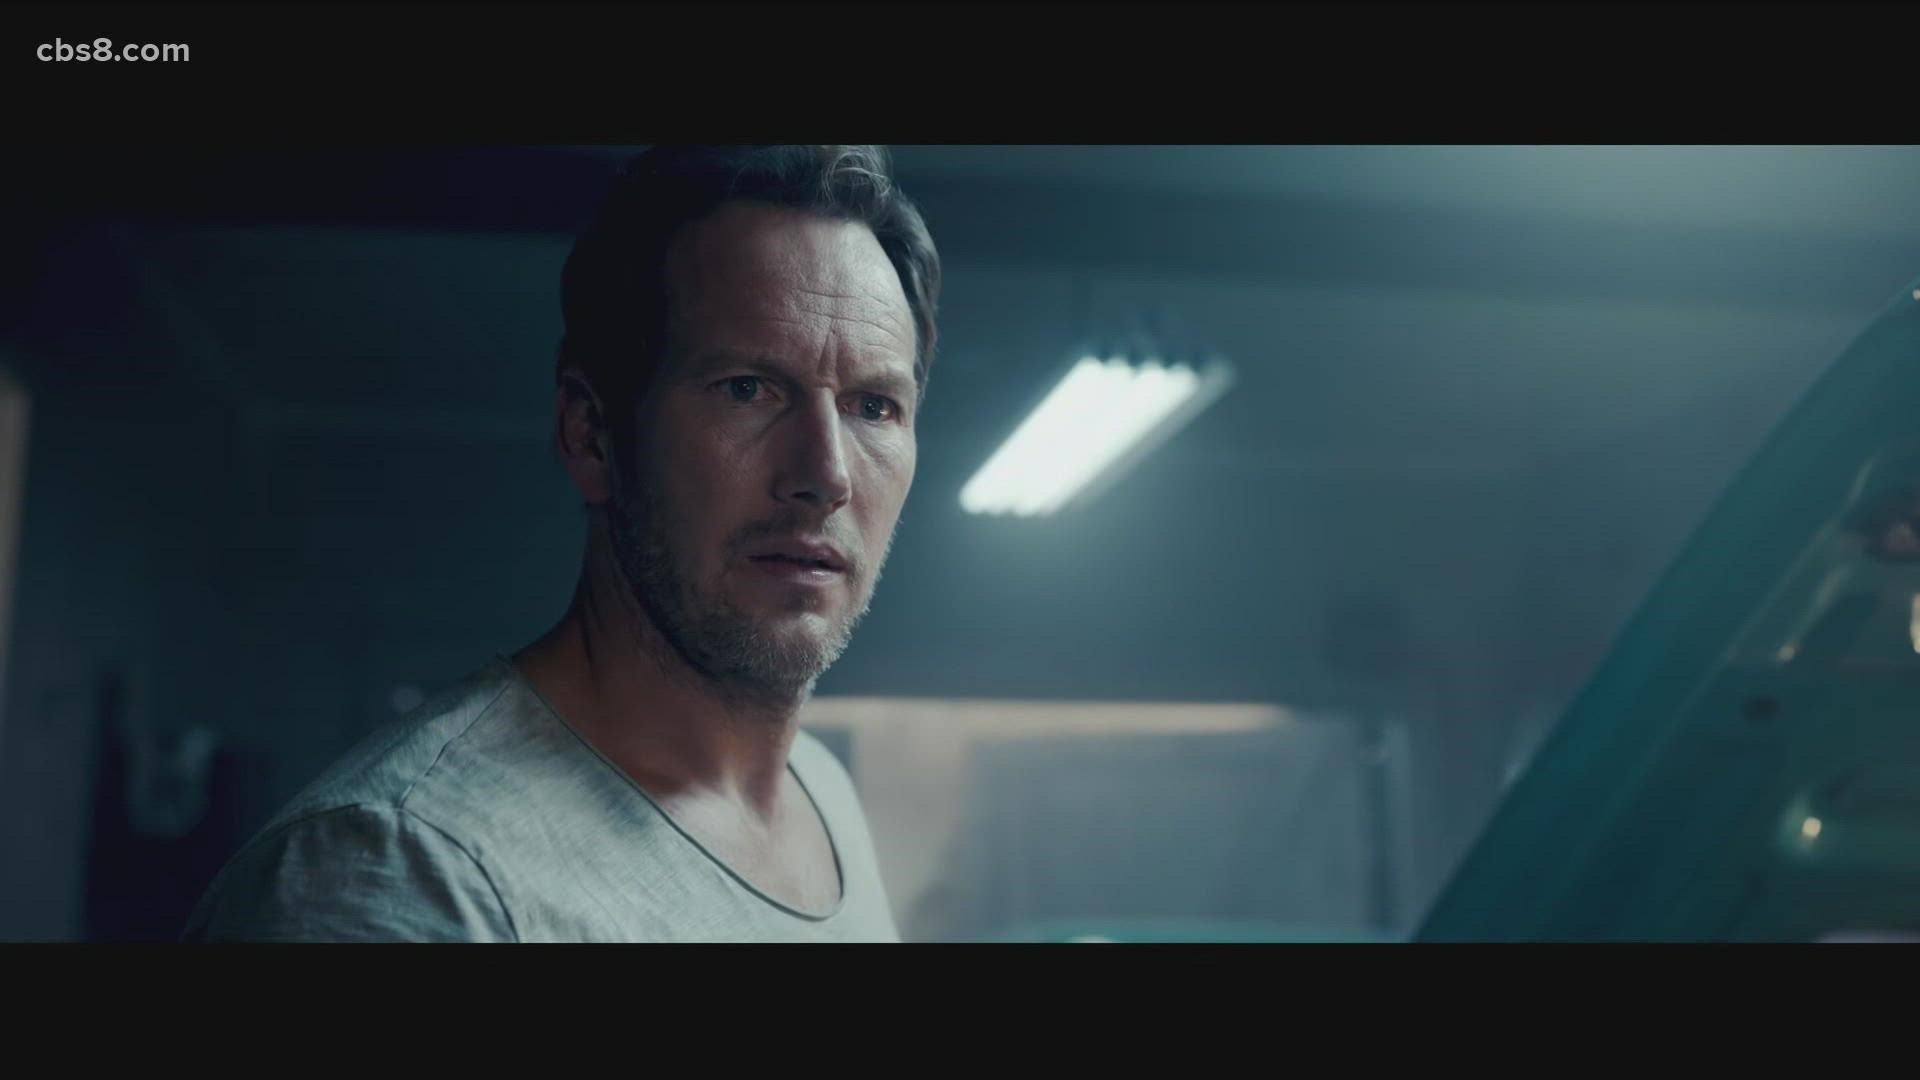 The sci-fi thriller hits theatres Friday and stars Patrick Wilson and Halle Berry.